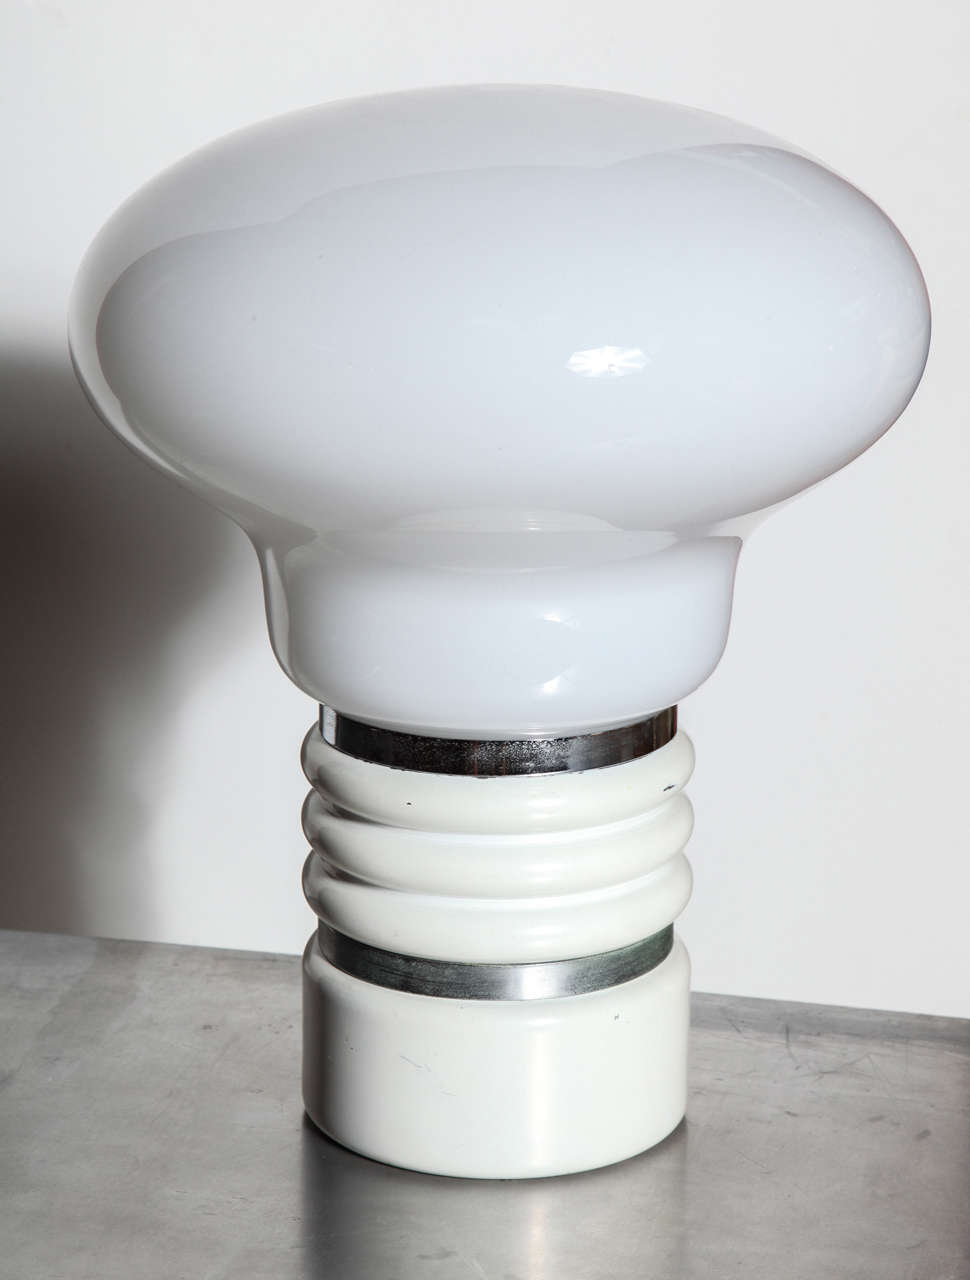 European Modern Pop Art Chrome and Glass Mazzega Murano style Table Lamp.  Featuring a large  hand blown translucent mushroom-shaped 14D White glass light bulb Shade on a banded Chrome and ribbed Off White 6D base. Resembles oversize light bulb.